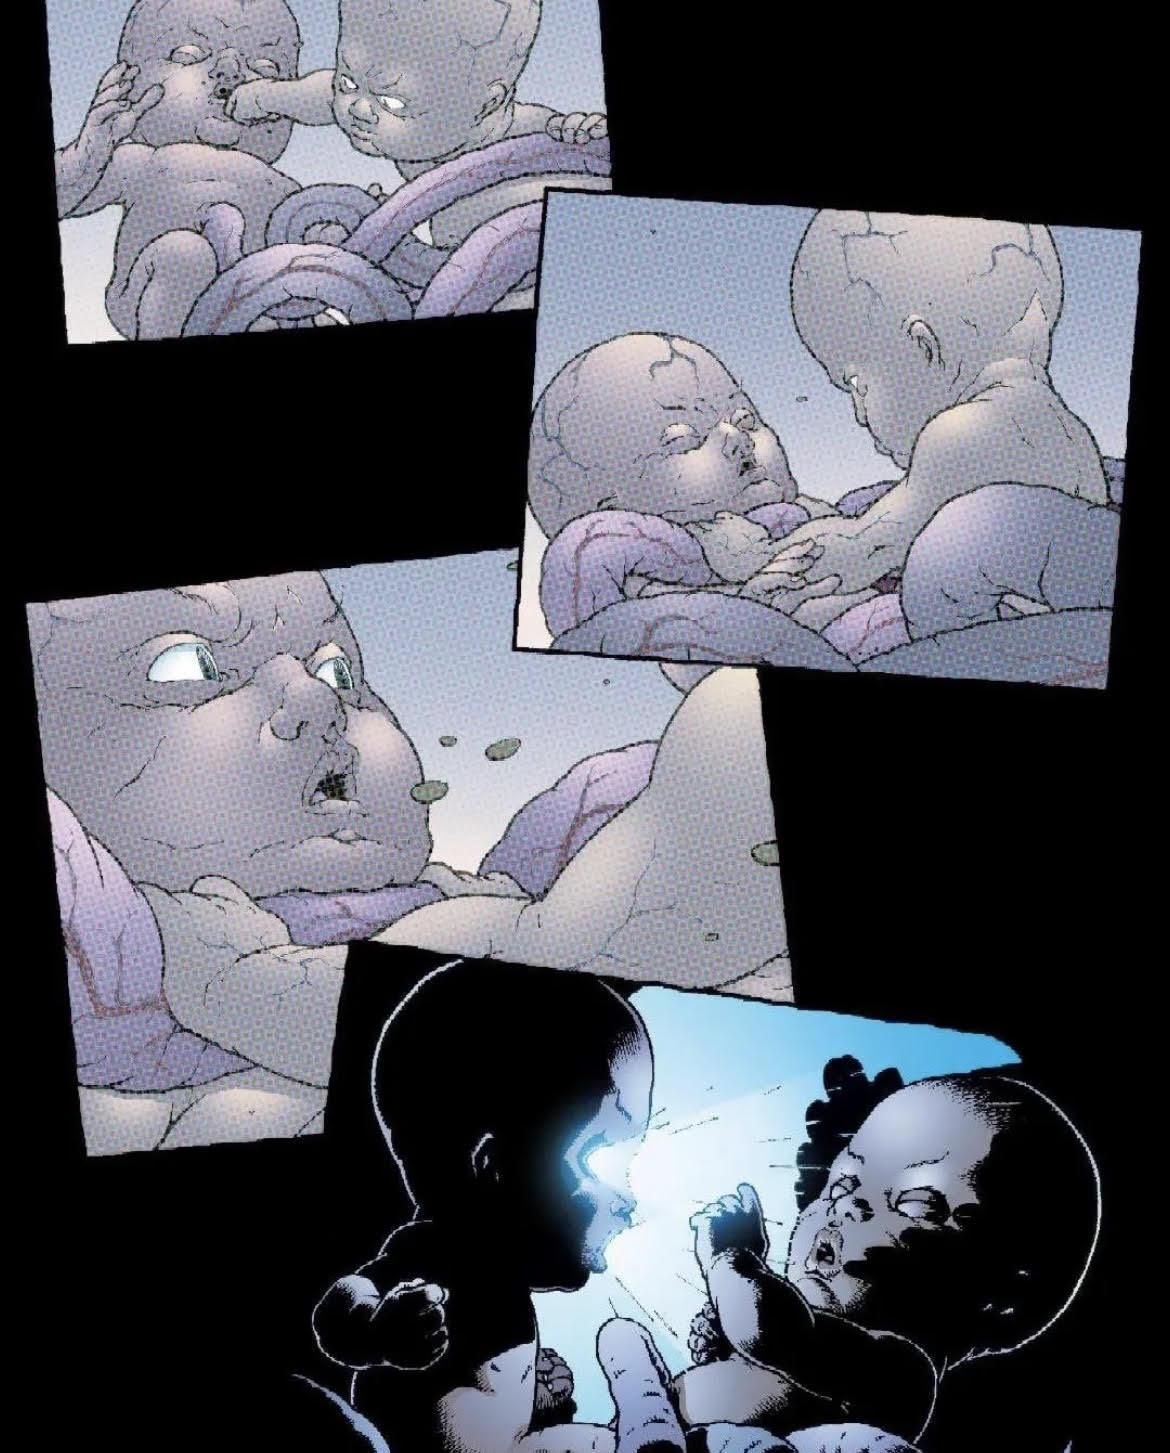 Professor Charles Xavier fights Cassandra Nova as a baby in the womb